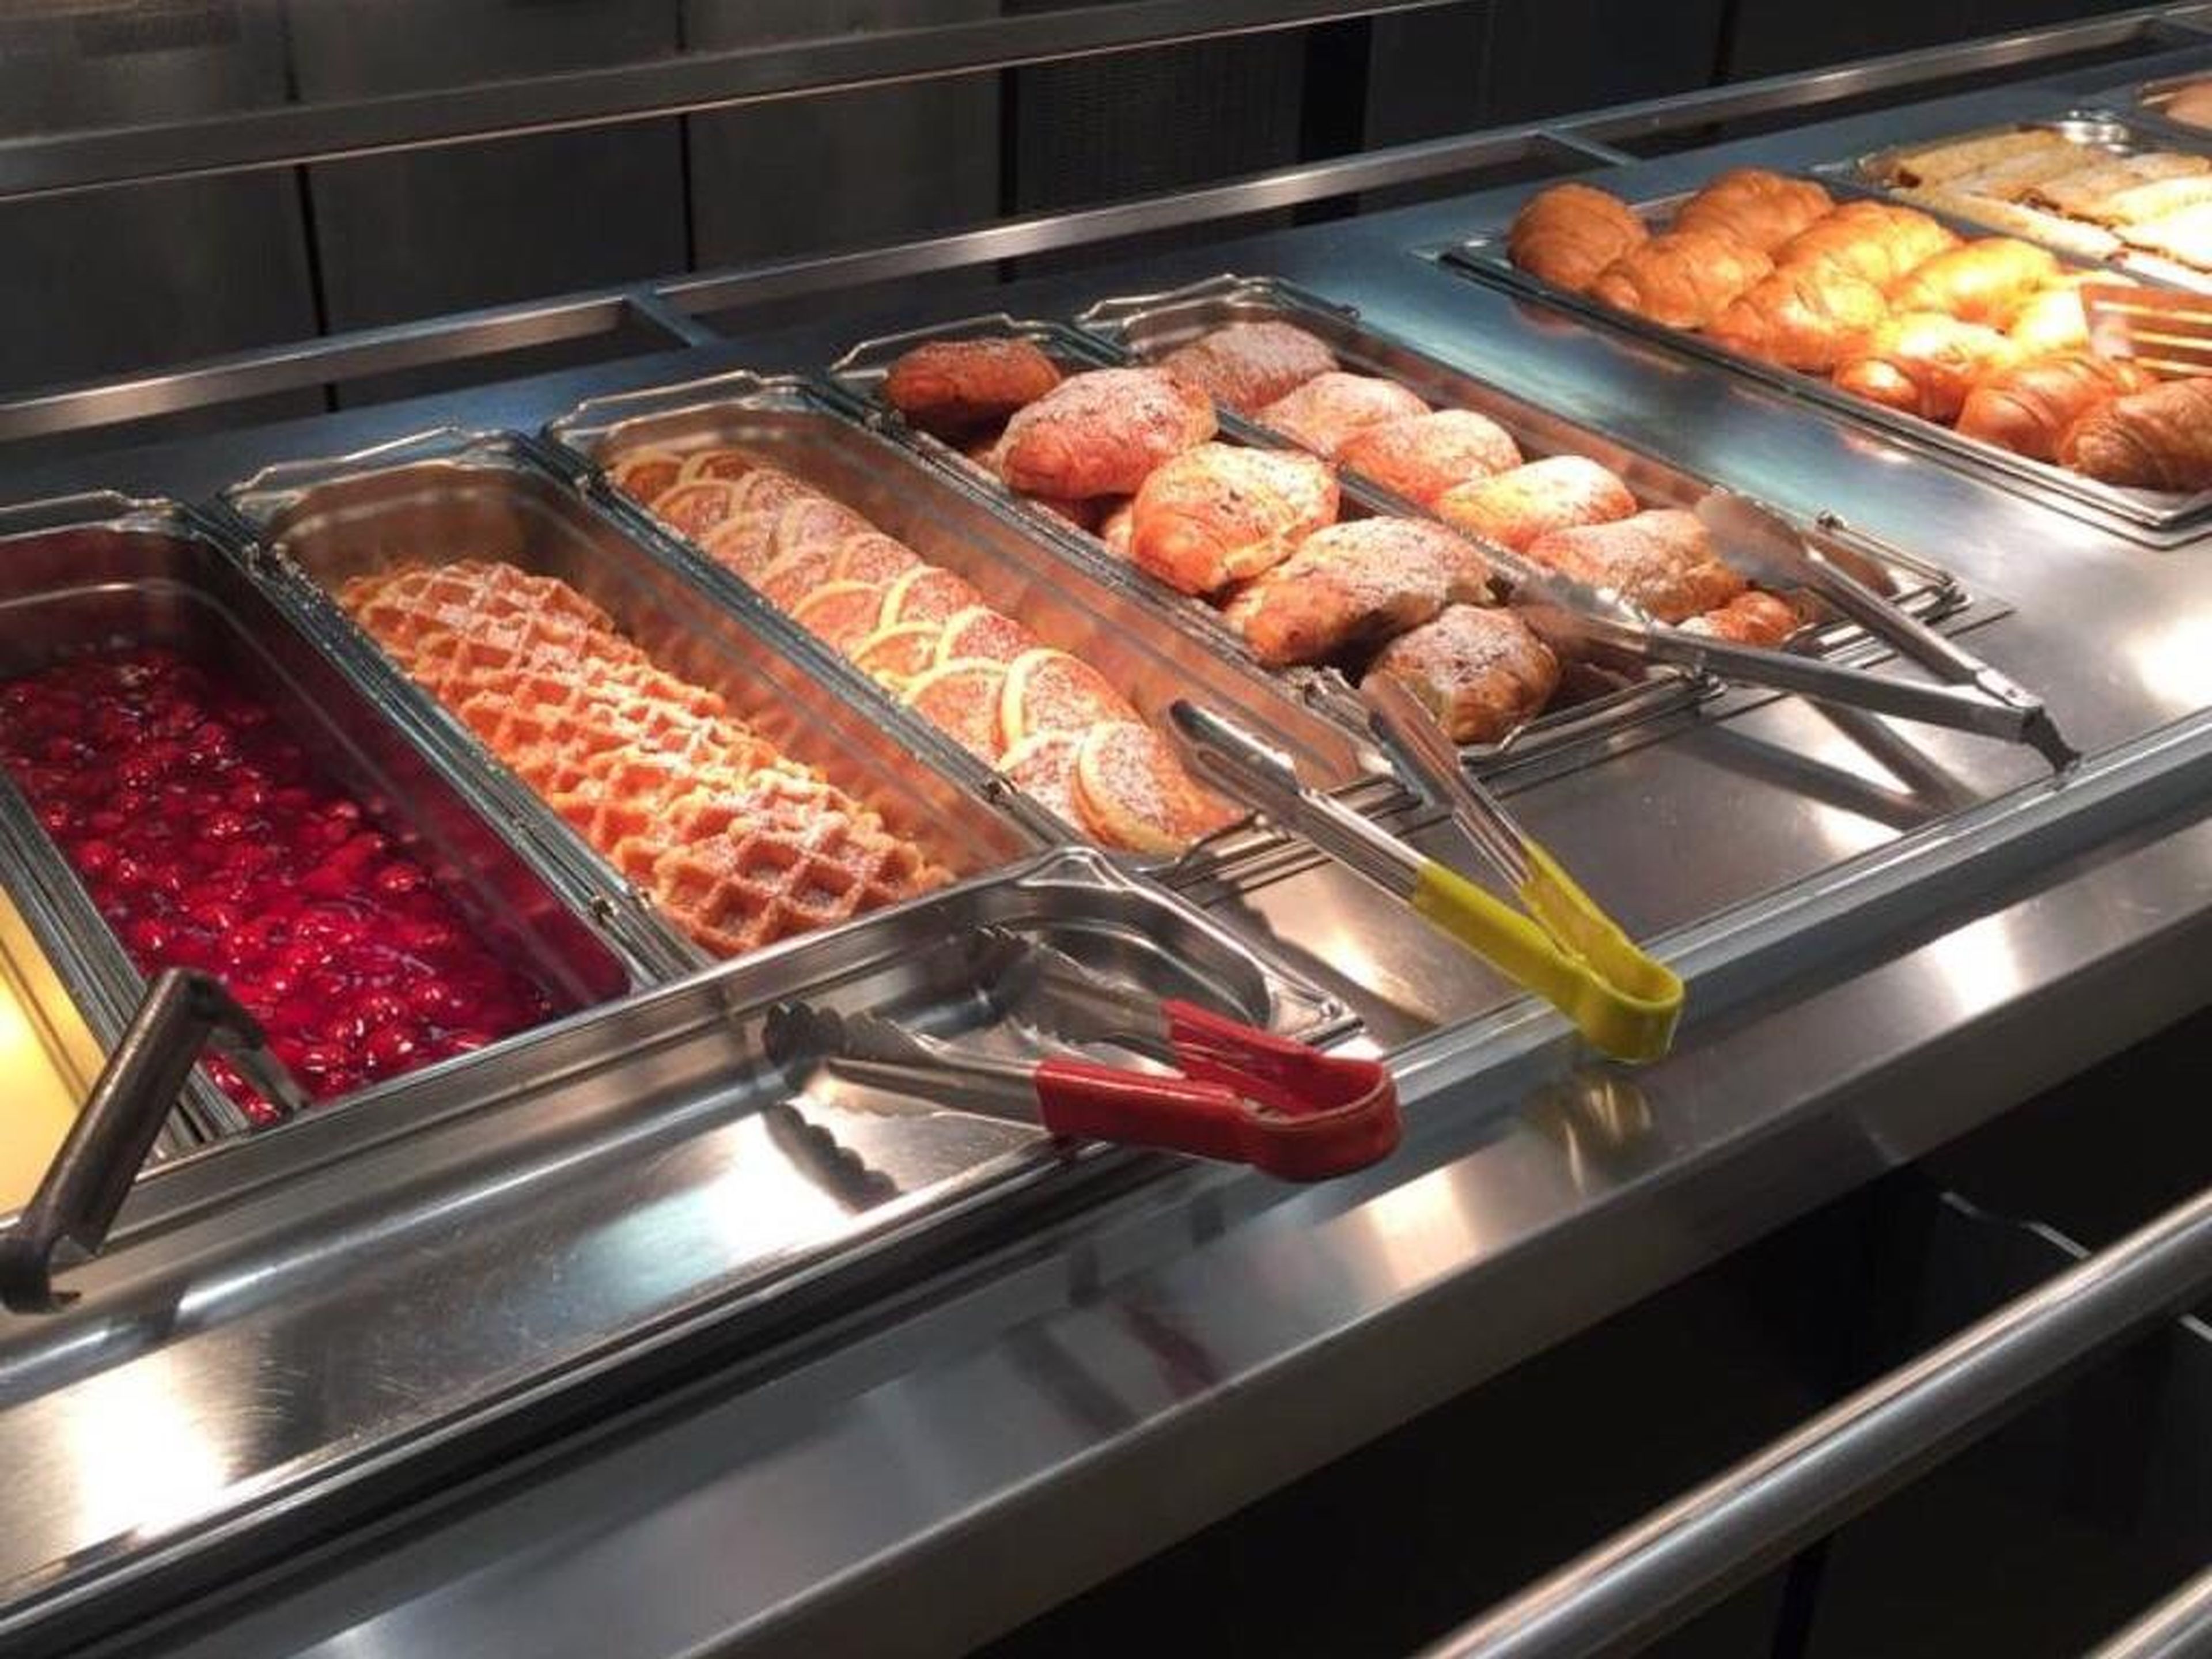 This IKEA in Germany features a buffet of breakfast options.